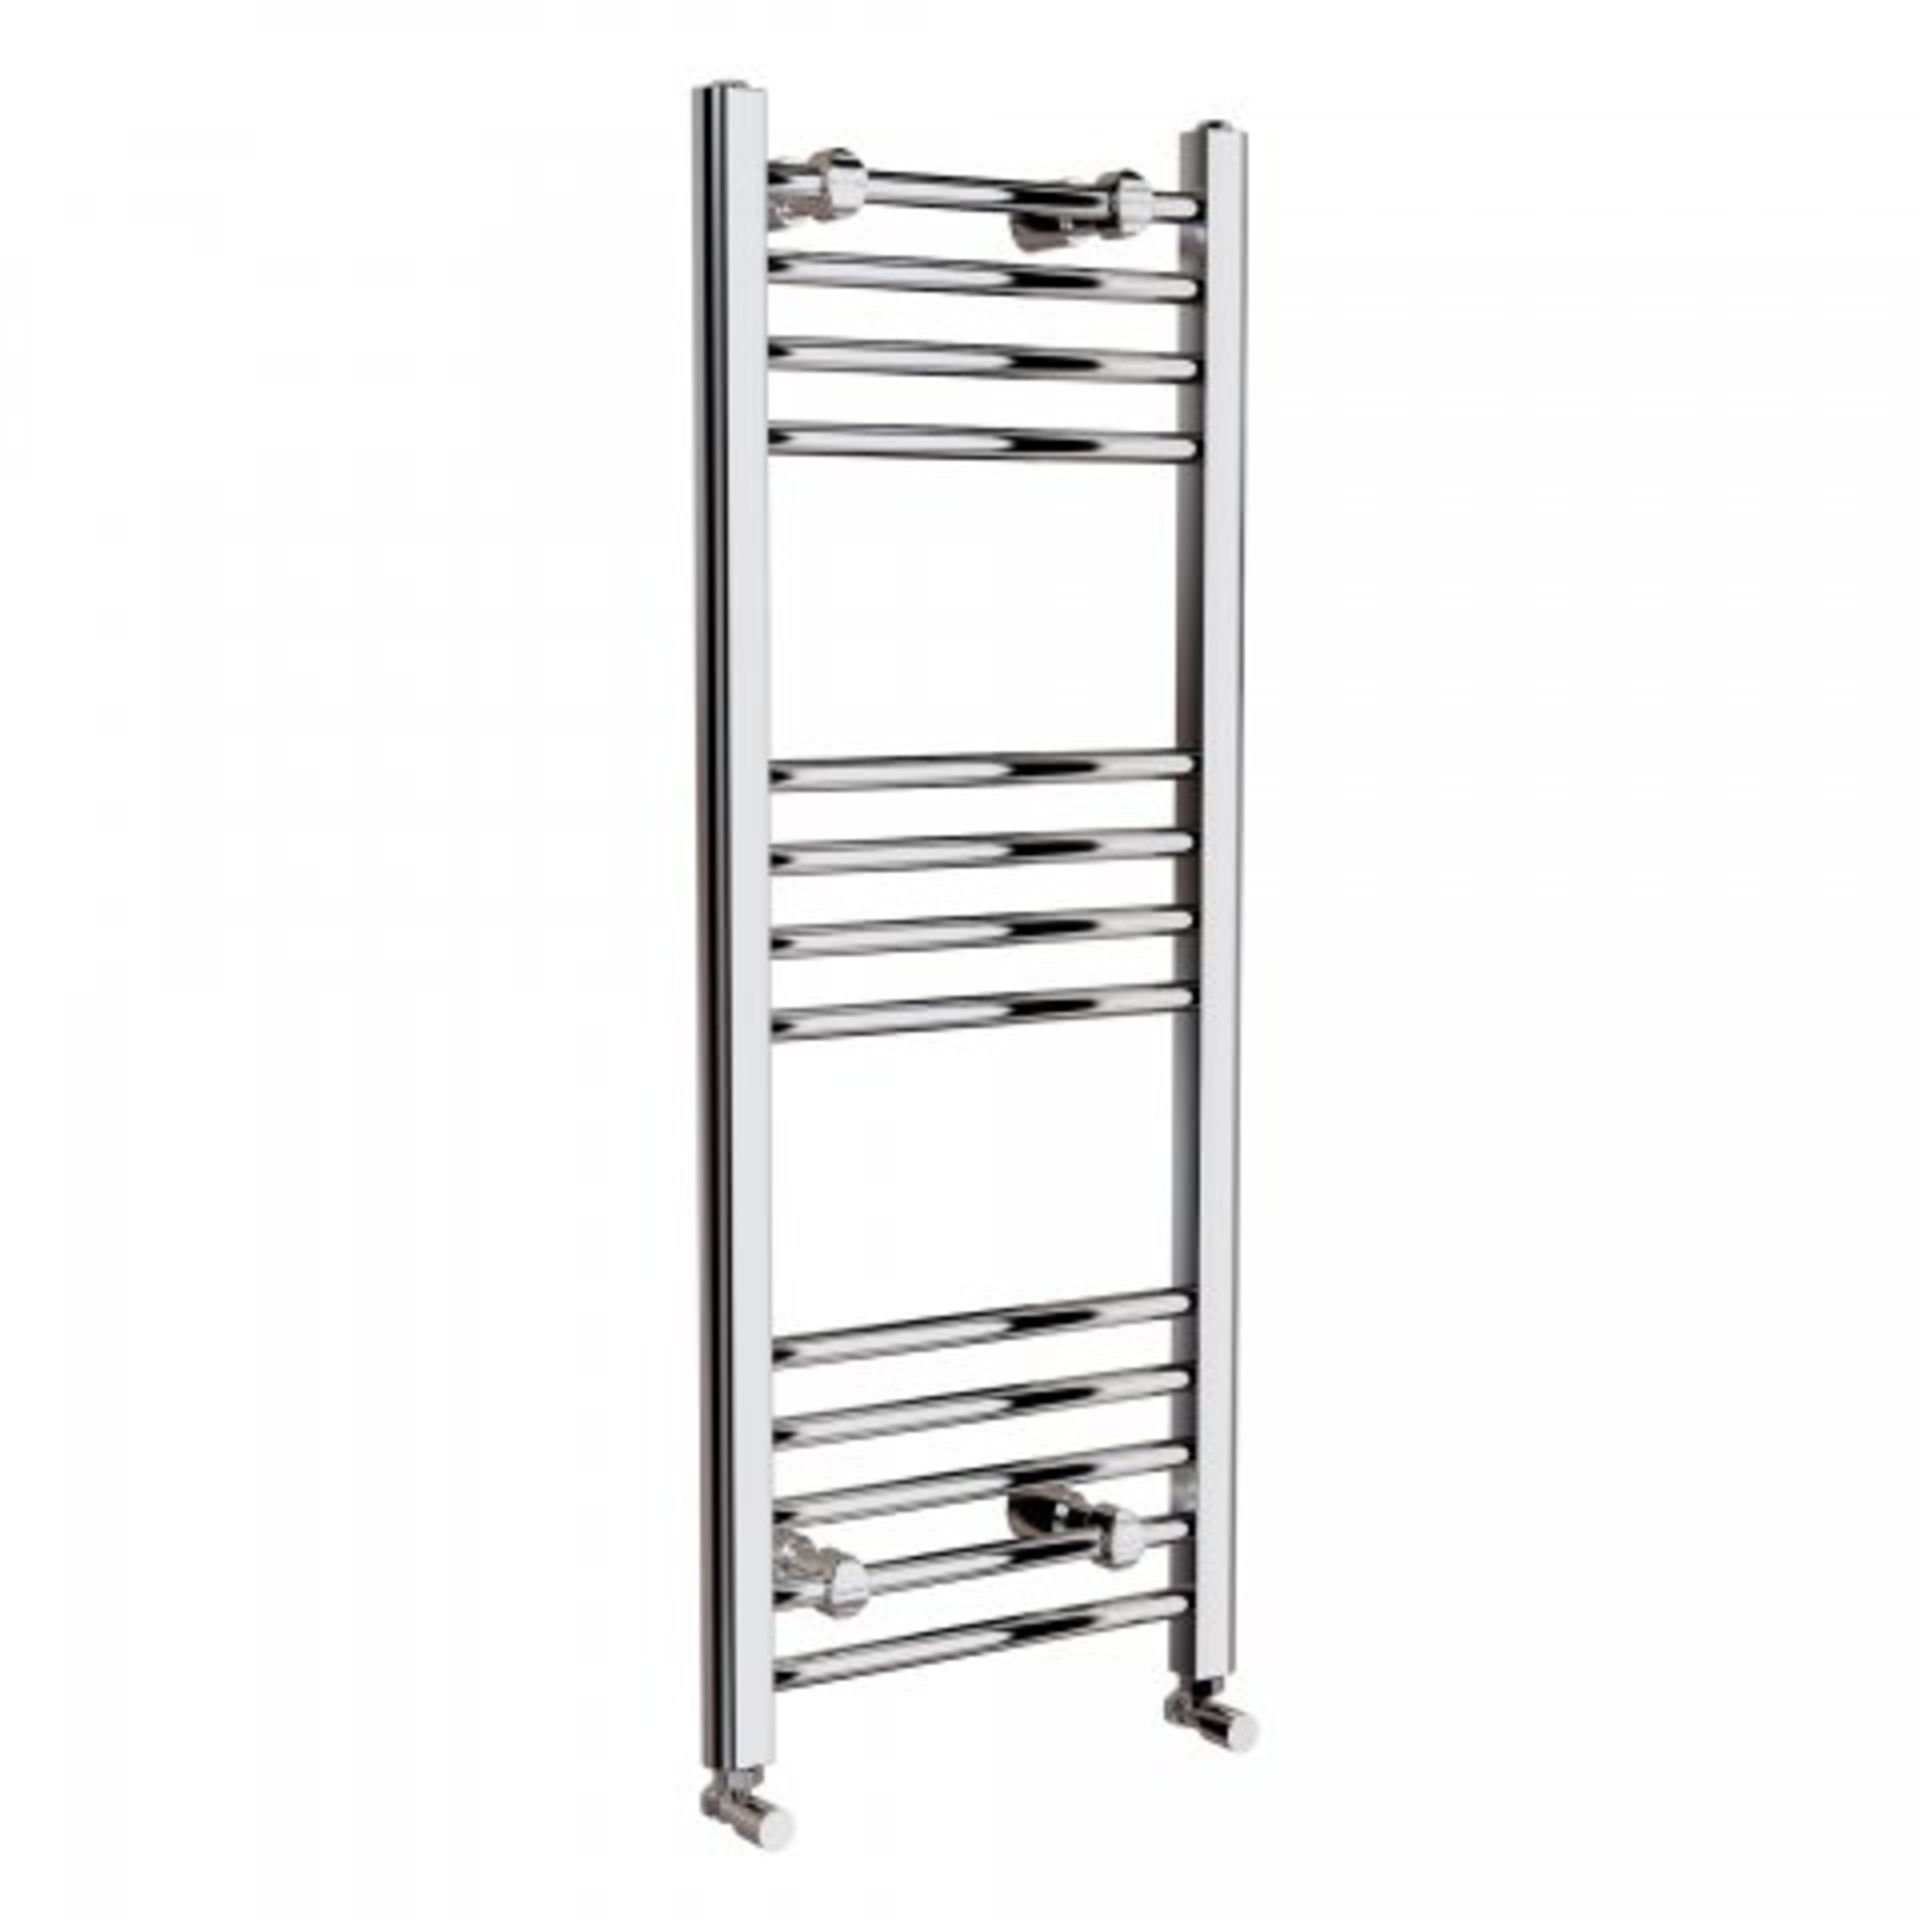 (A18) 1000x400mm - 20mm Tubes - Chrome Heated Straight Rail Ladder Towel Radiator Designer Touch For - Image 3 of 7